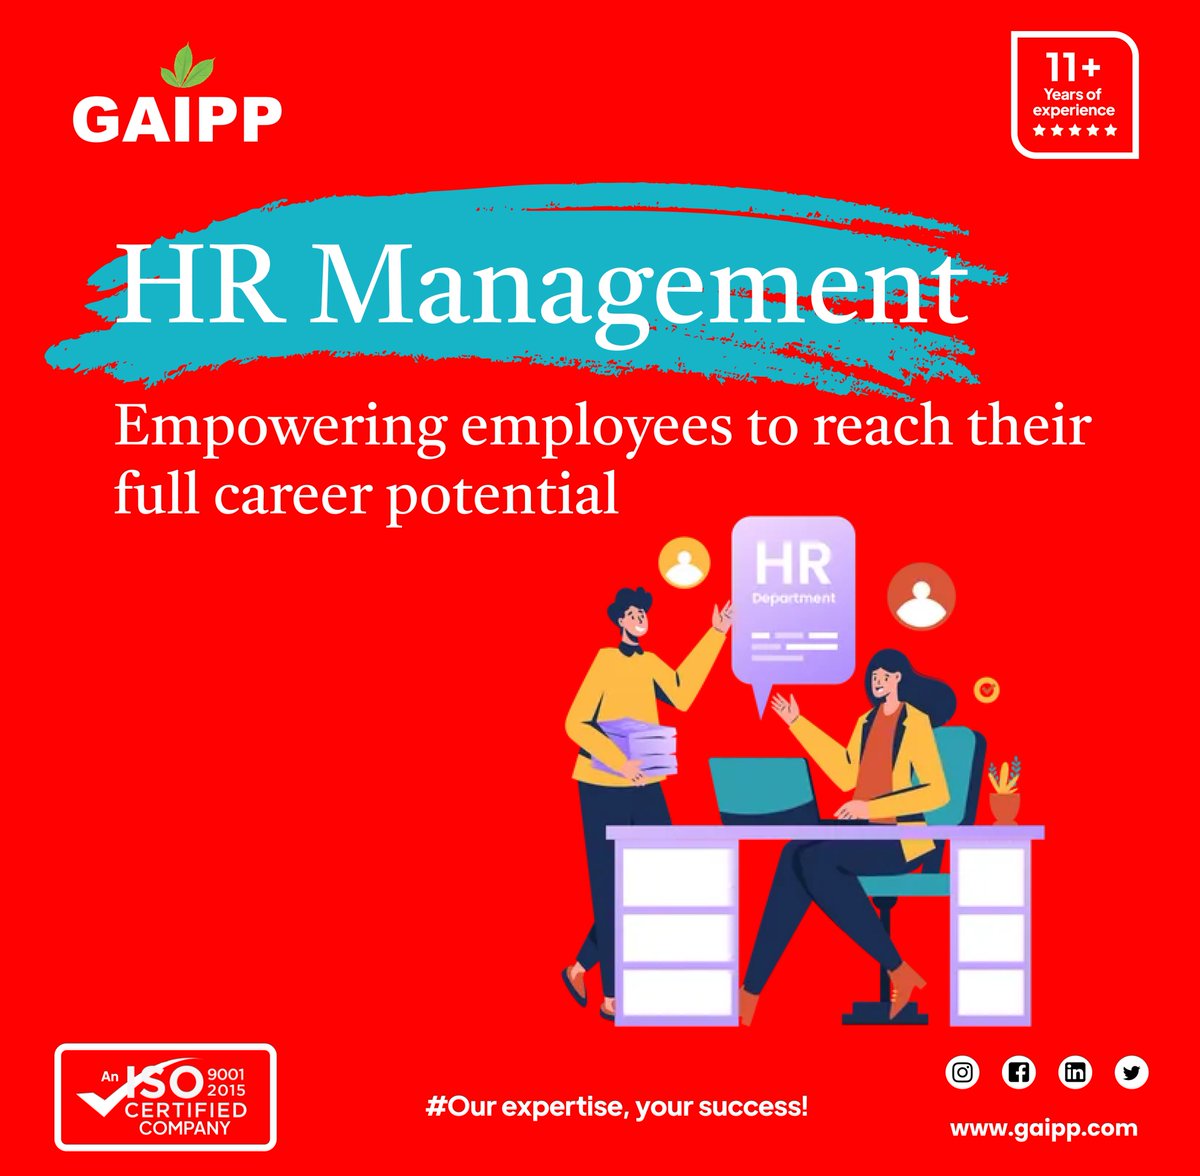 HR Management is the Key Role to Unlocking Limitless Career Horizons. 

#HRManagement #Gaipp #EmpowerEmployees #CareerPotential #UnleashSuccess #HRMastery #ElevateYourTeam